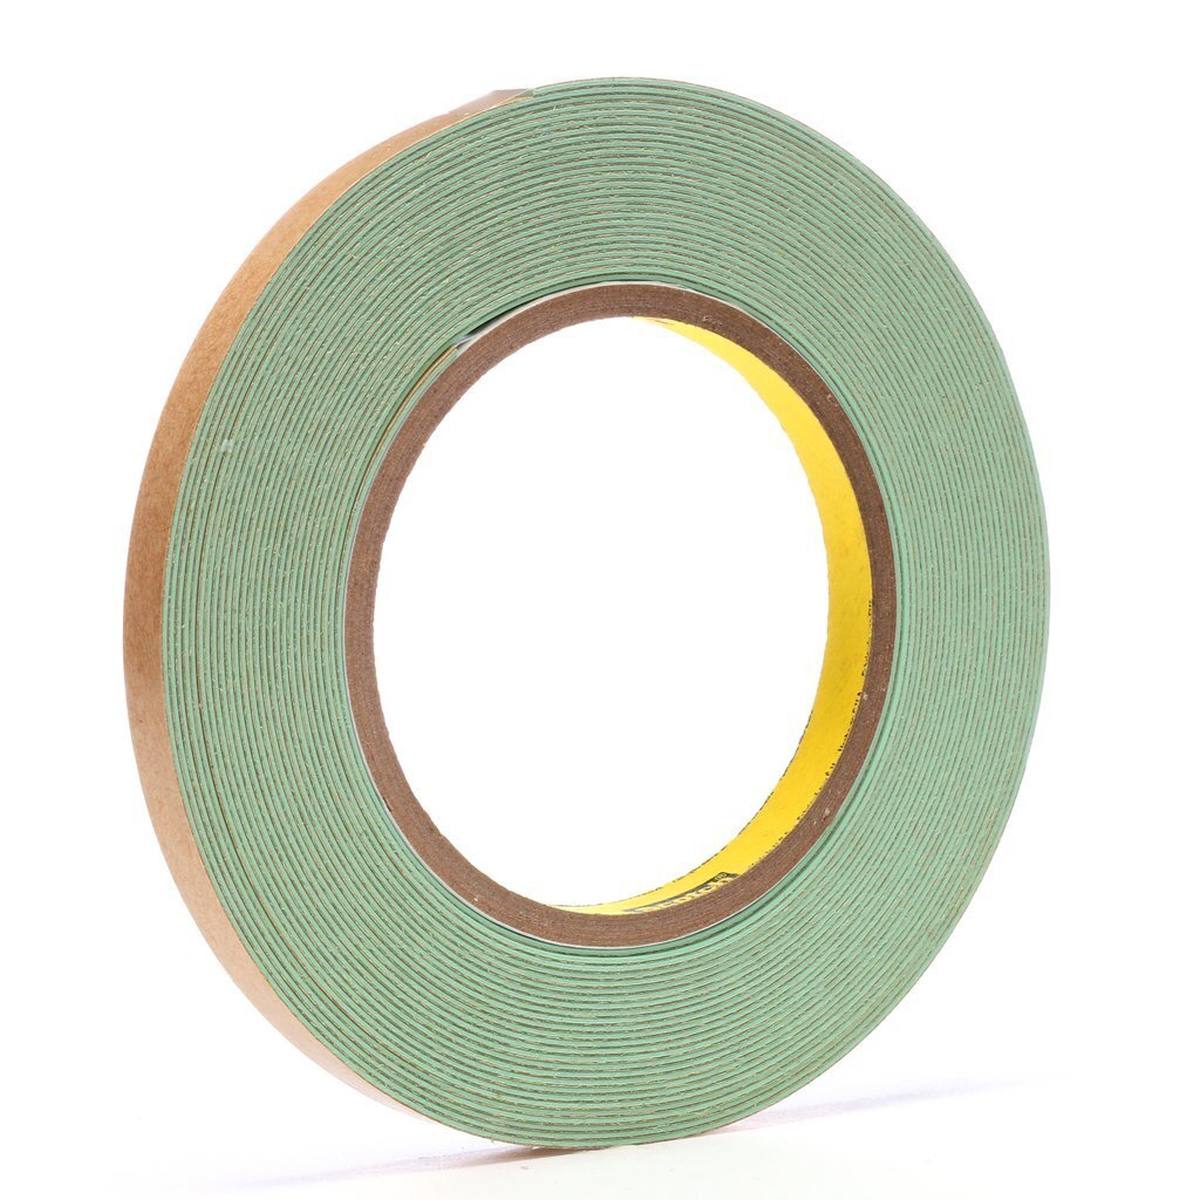 3M Seam sealing tape, light green, 9.1 m x 9.5 mm x 0.9 mm, can be painted over